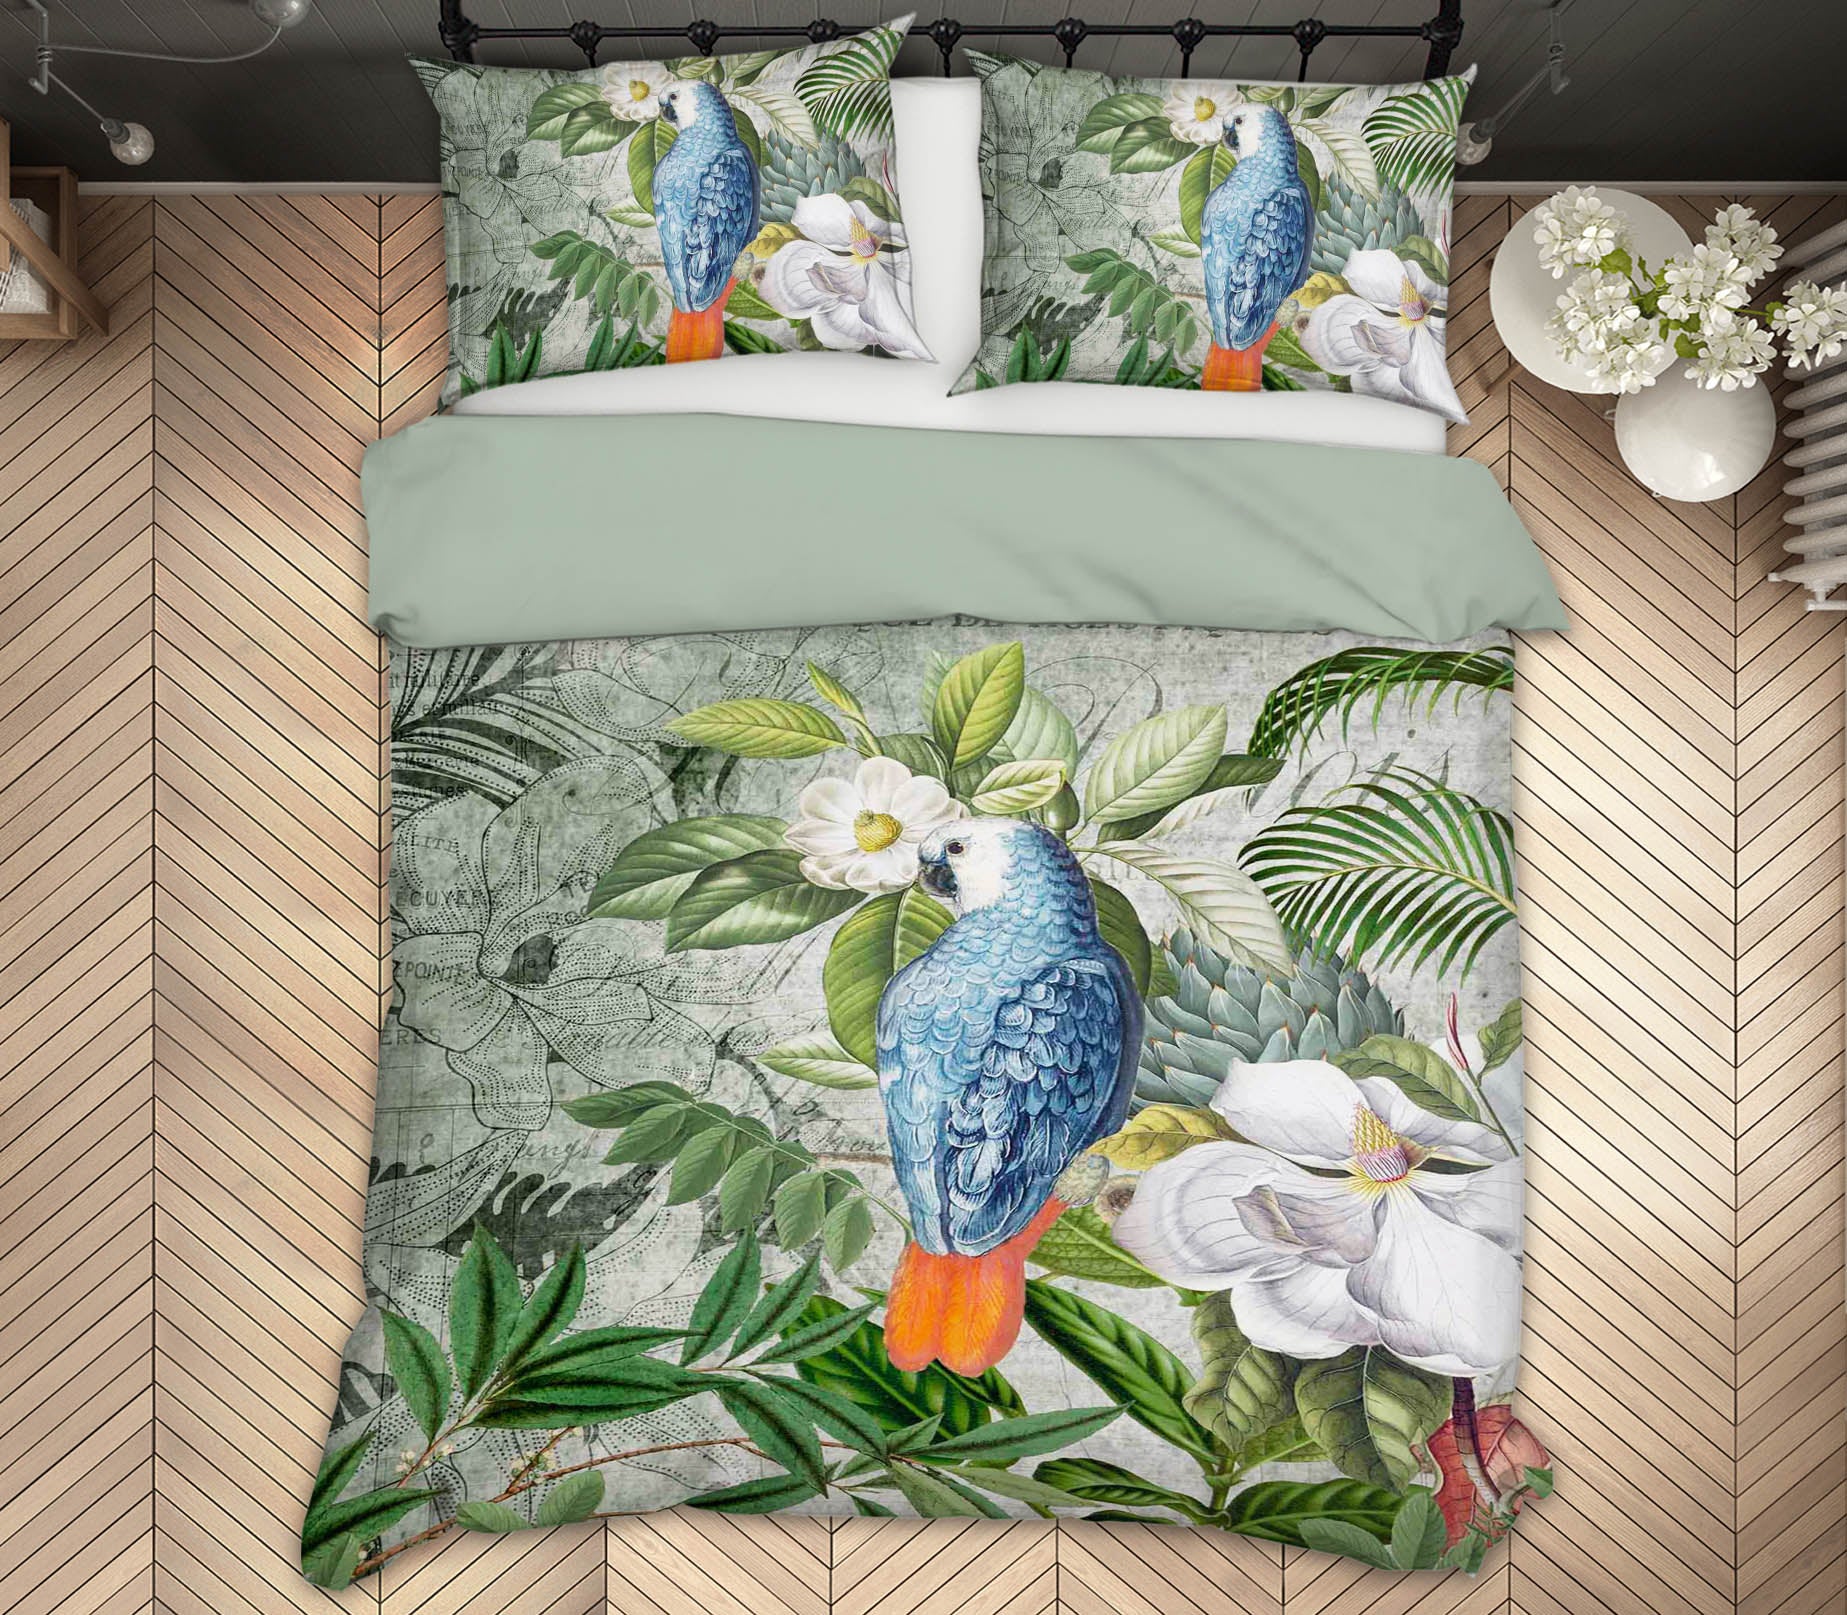 3D Kingdom Of Birds 2134 Andrea haase Bedding Bed Pillowcases Quilt